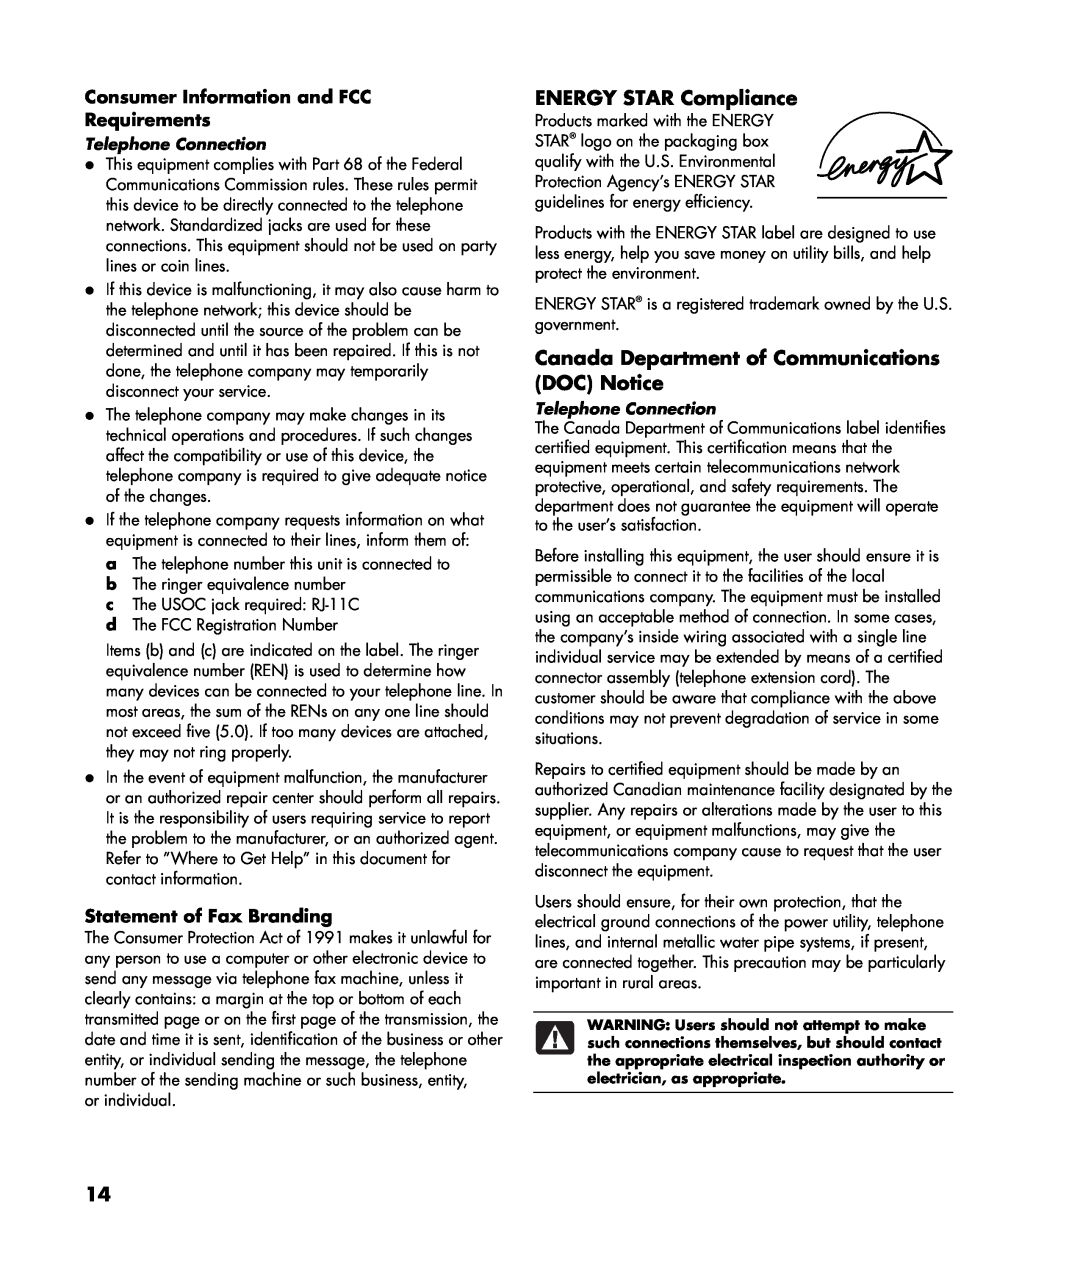 HP a1022n, a1013w, a1010n ENERGY STAR Compliance, Canada Department of Communications DOC Notice, Statement of Fax Branding 